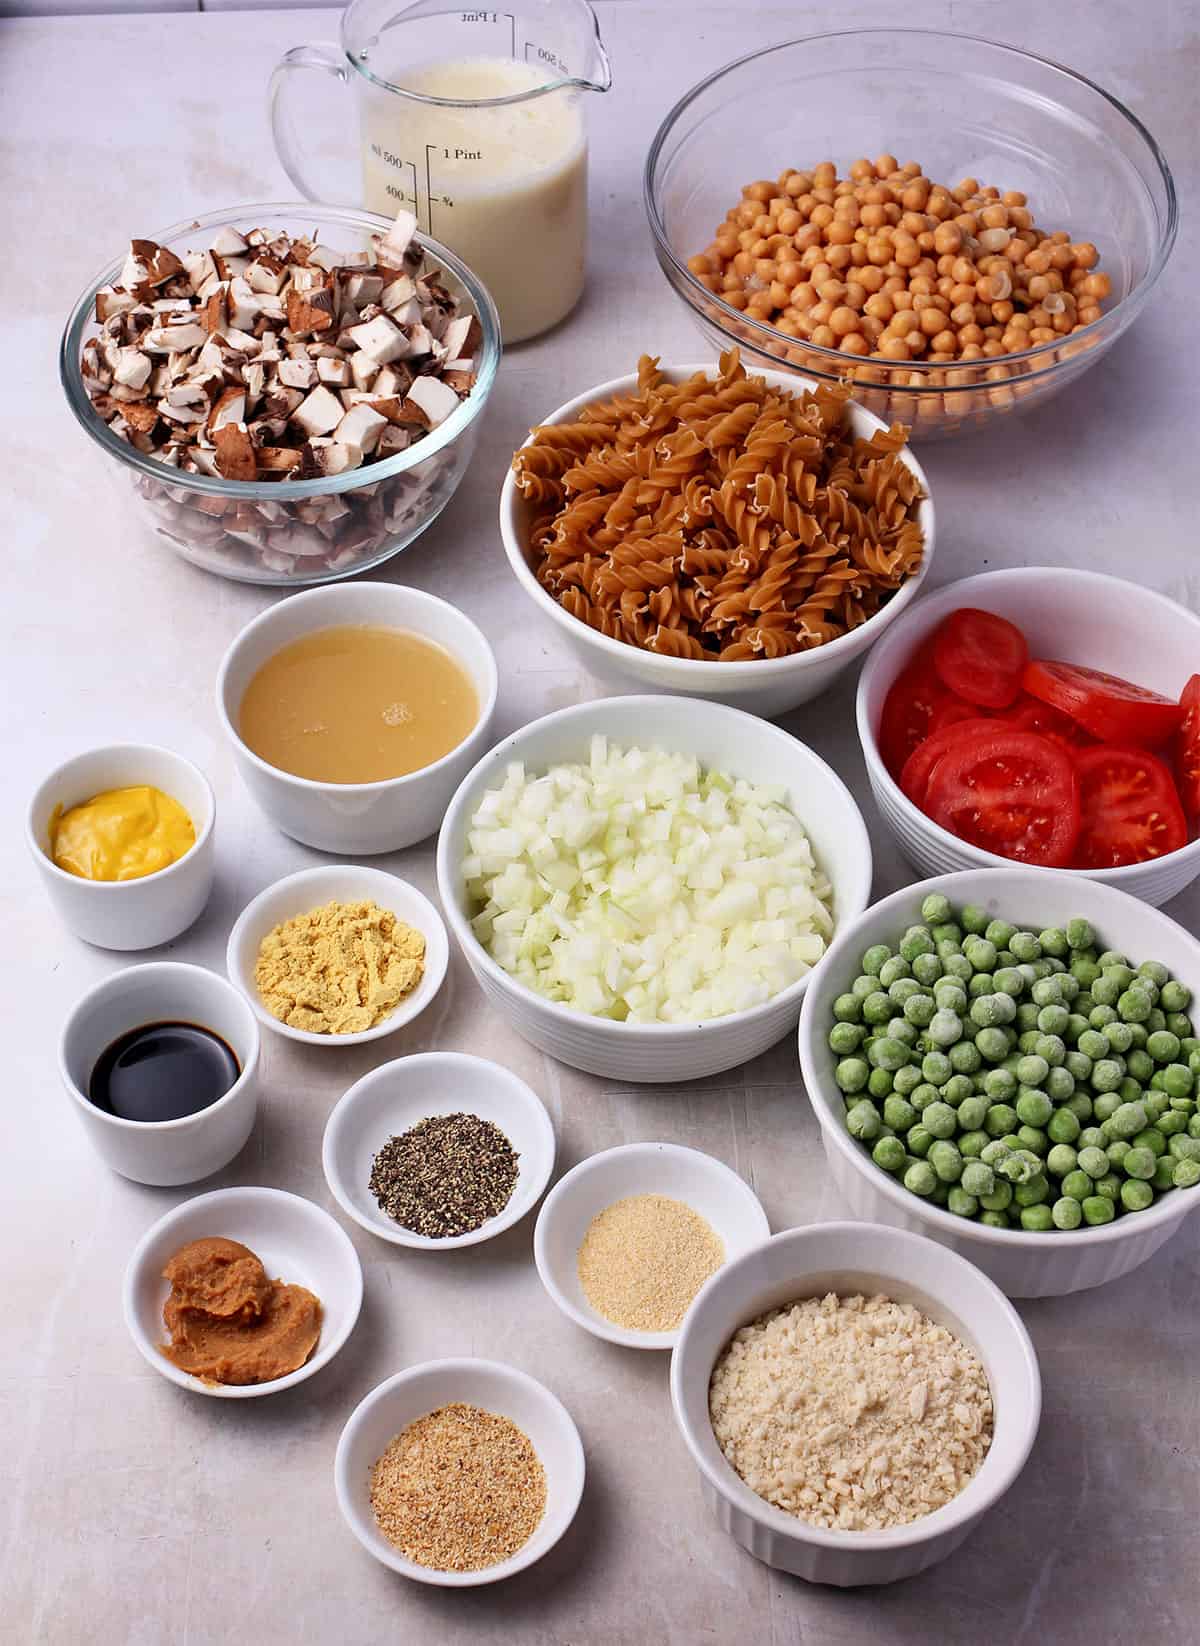 The ingredients for vegan tuna casserole in small bowls.